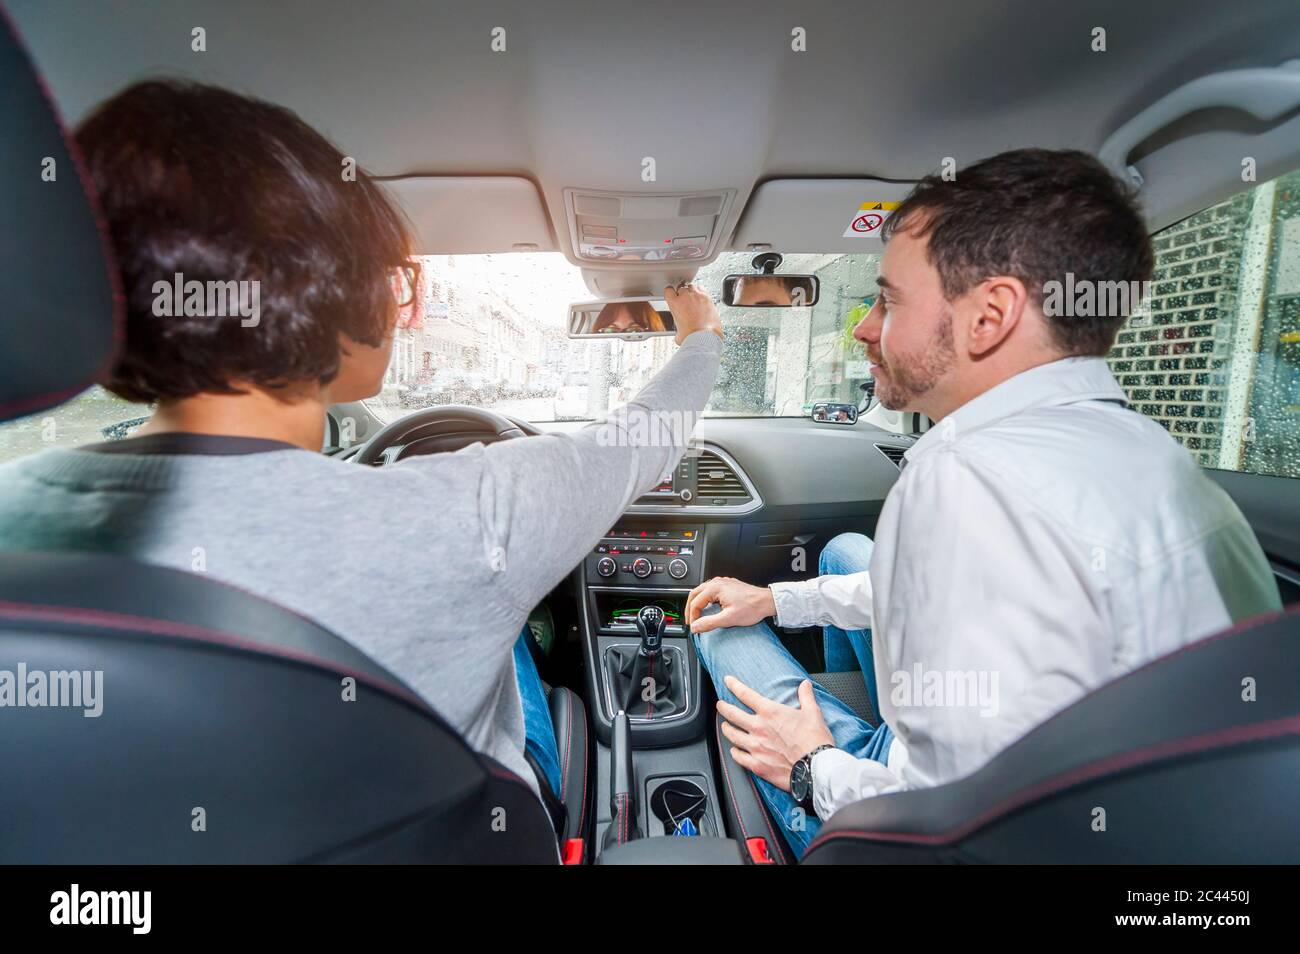 Learner driver with instructor in car, woman adjusting rear view mirror Stock Photo